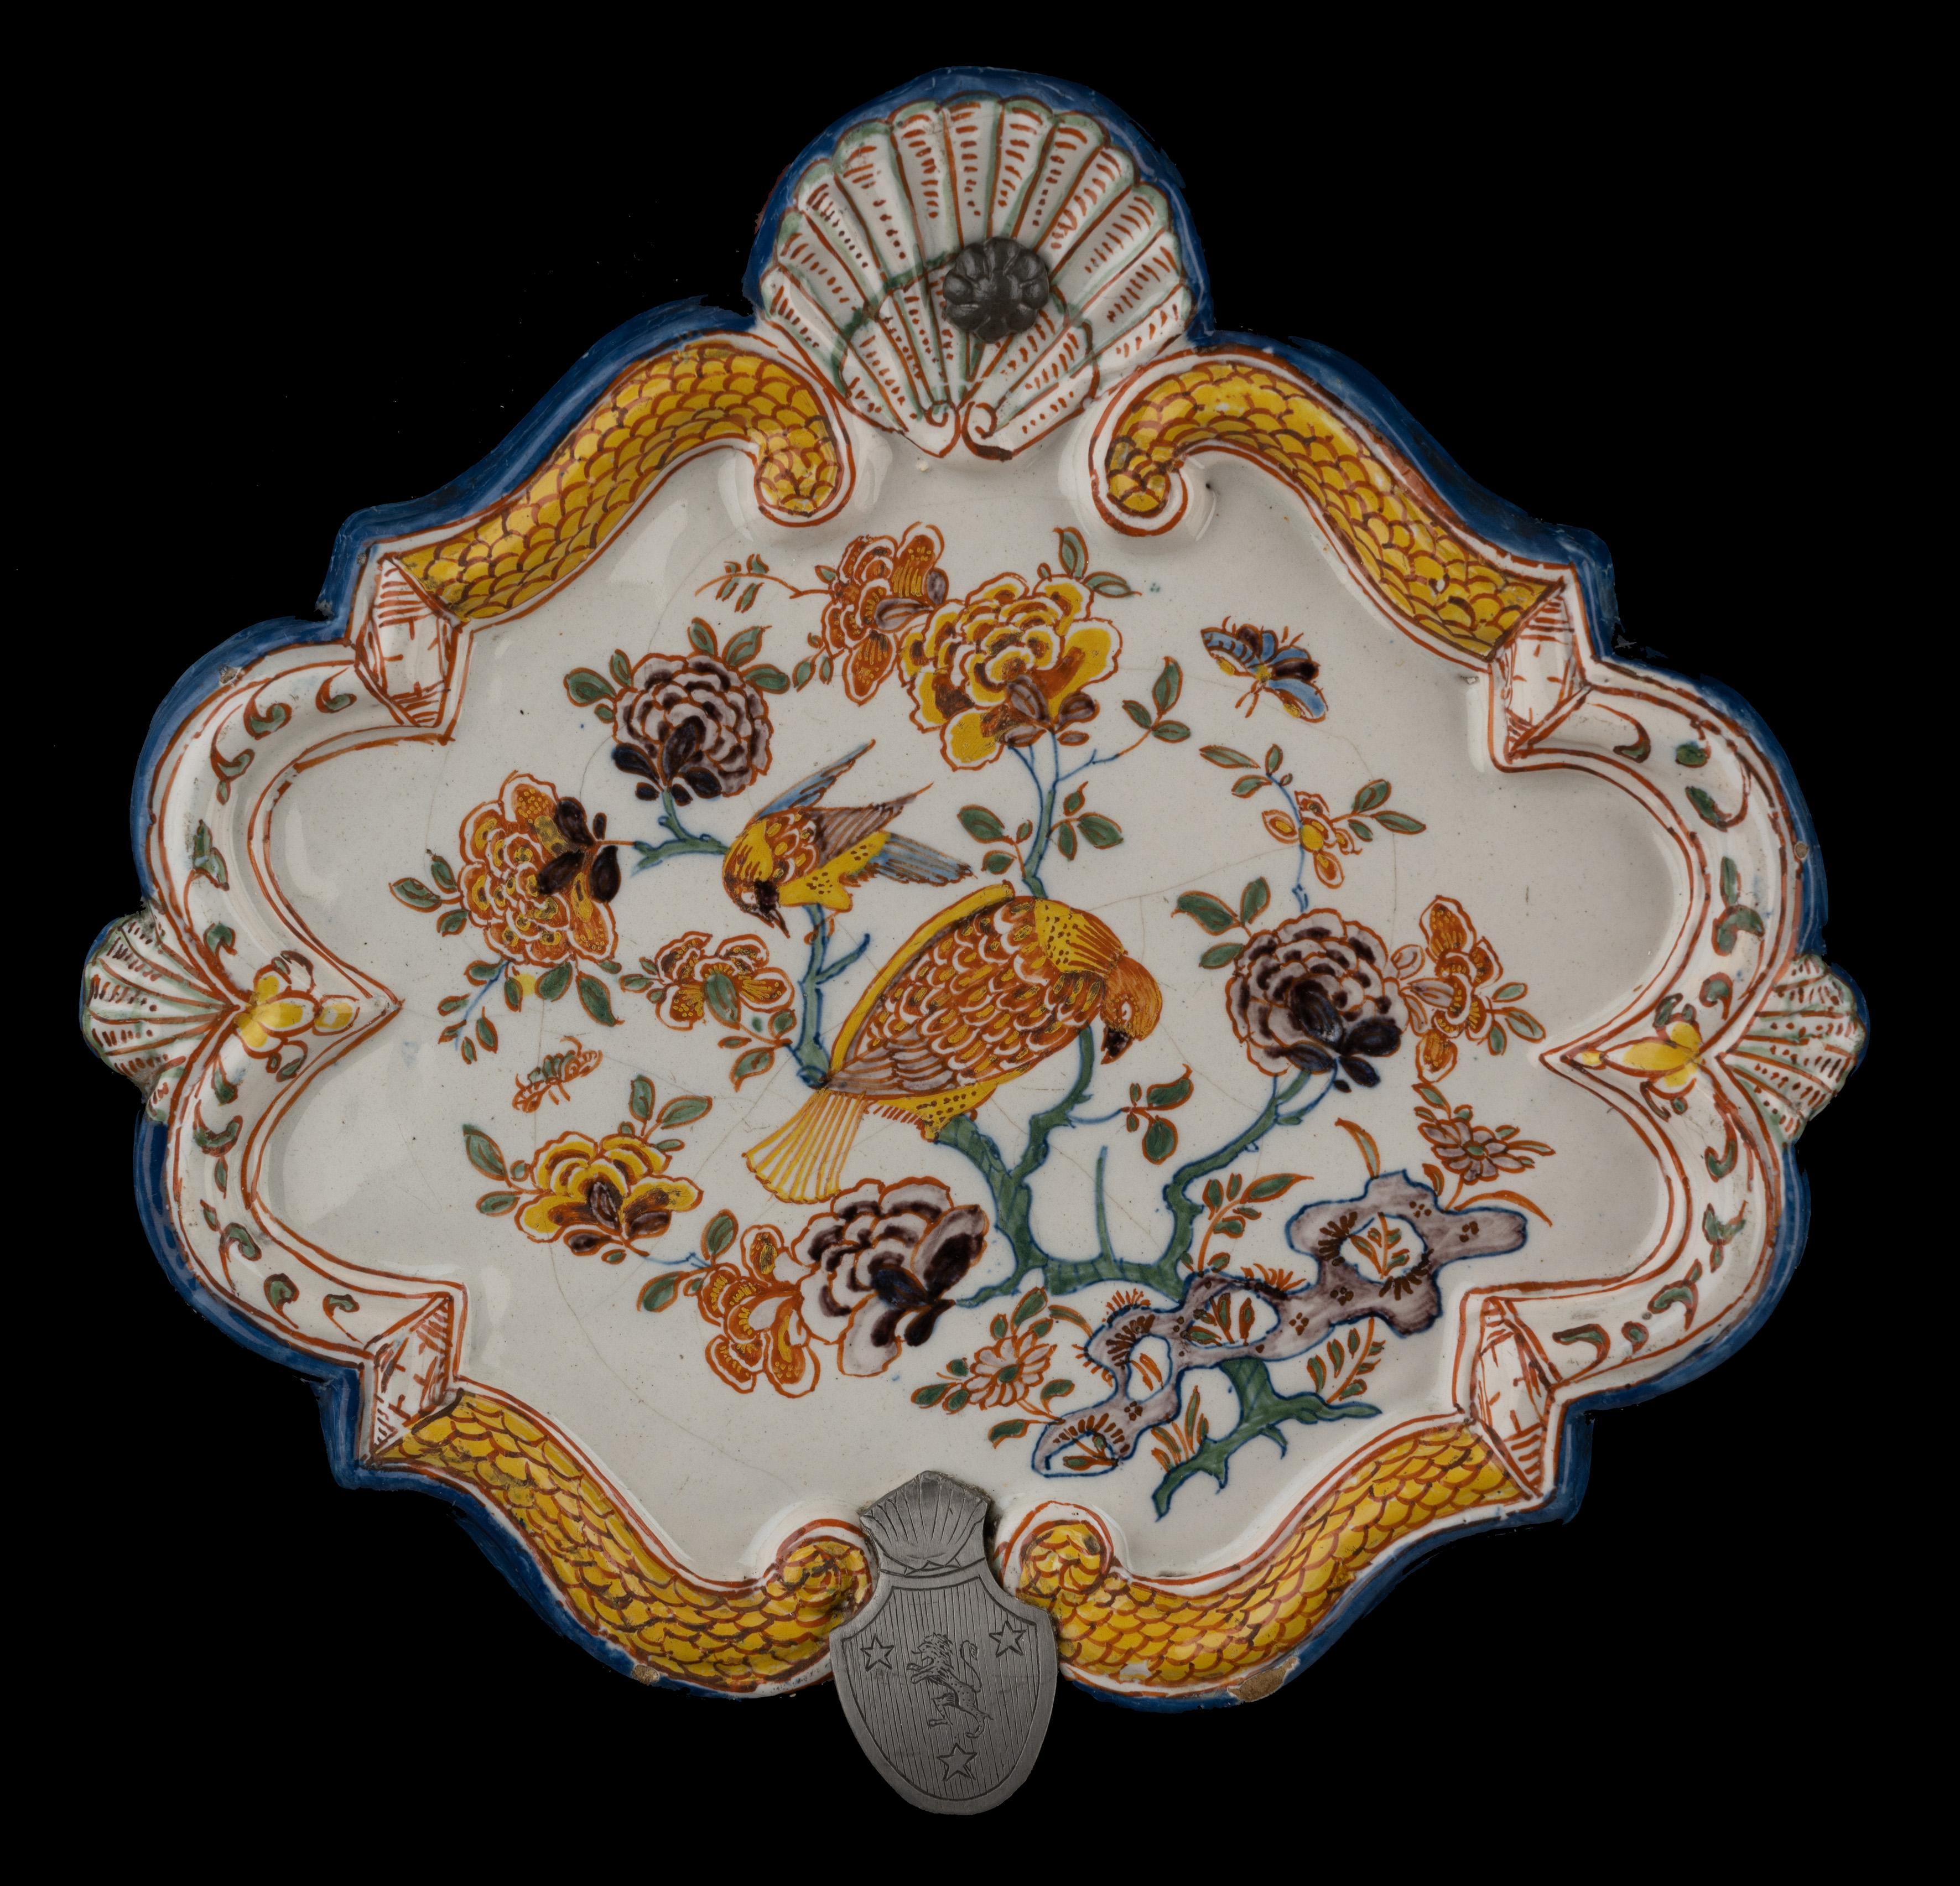 Polychrome plaque with floral chinoiserie decor. Delft, 1740-1760

The lozenge-shaped plaque has a raised, accolade-shaped rim interrupted at the top by a large shell with suspension hole and at the bottom by a smaller shell. A shell is also